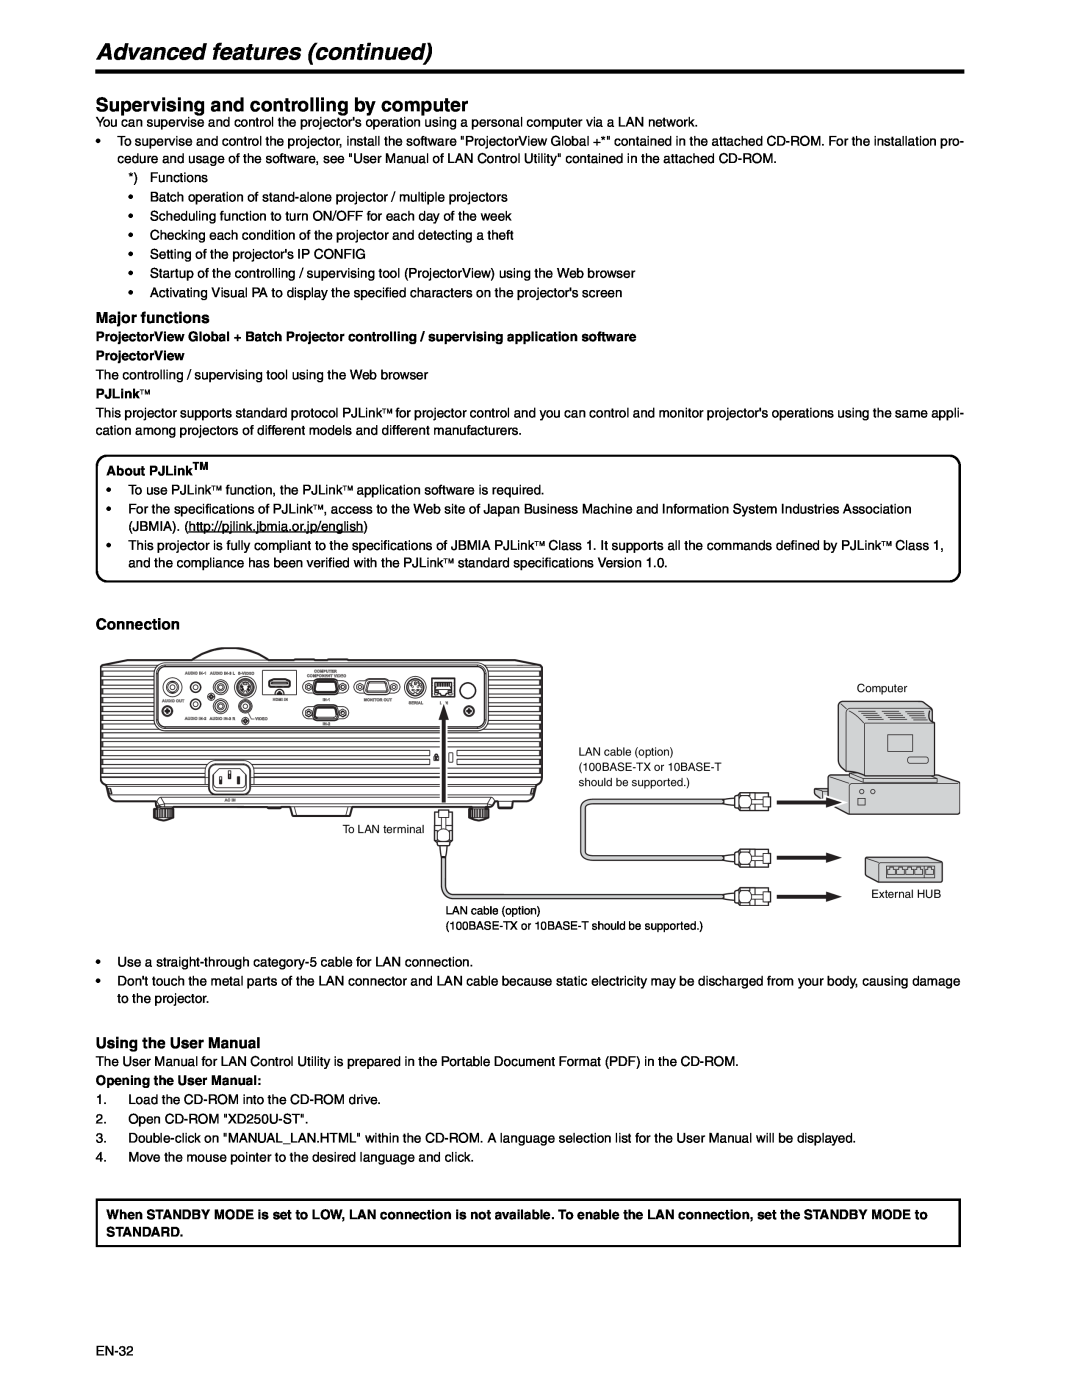 Mitsubishi Electronics XD250U-ST user manual Supervising and controlling by computer, Major functions, Connection 